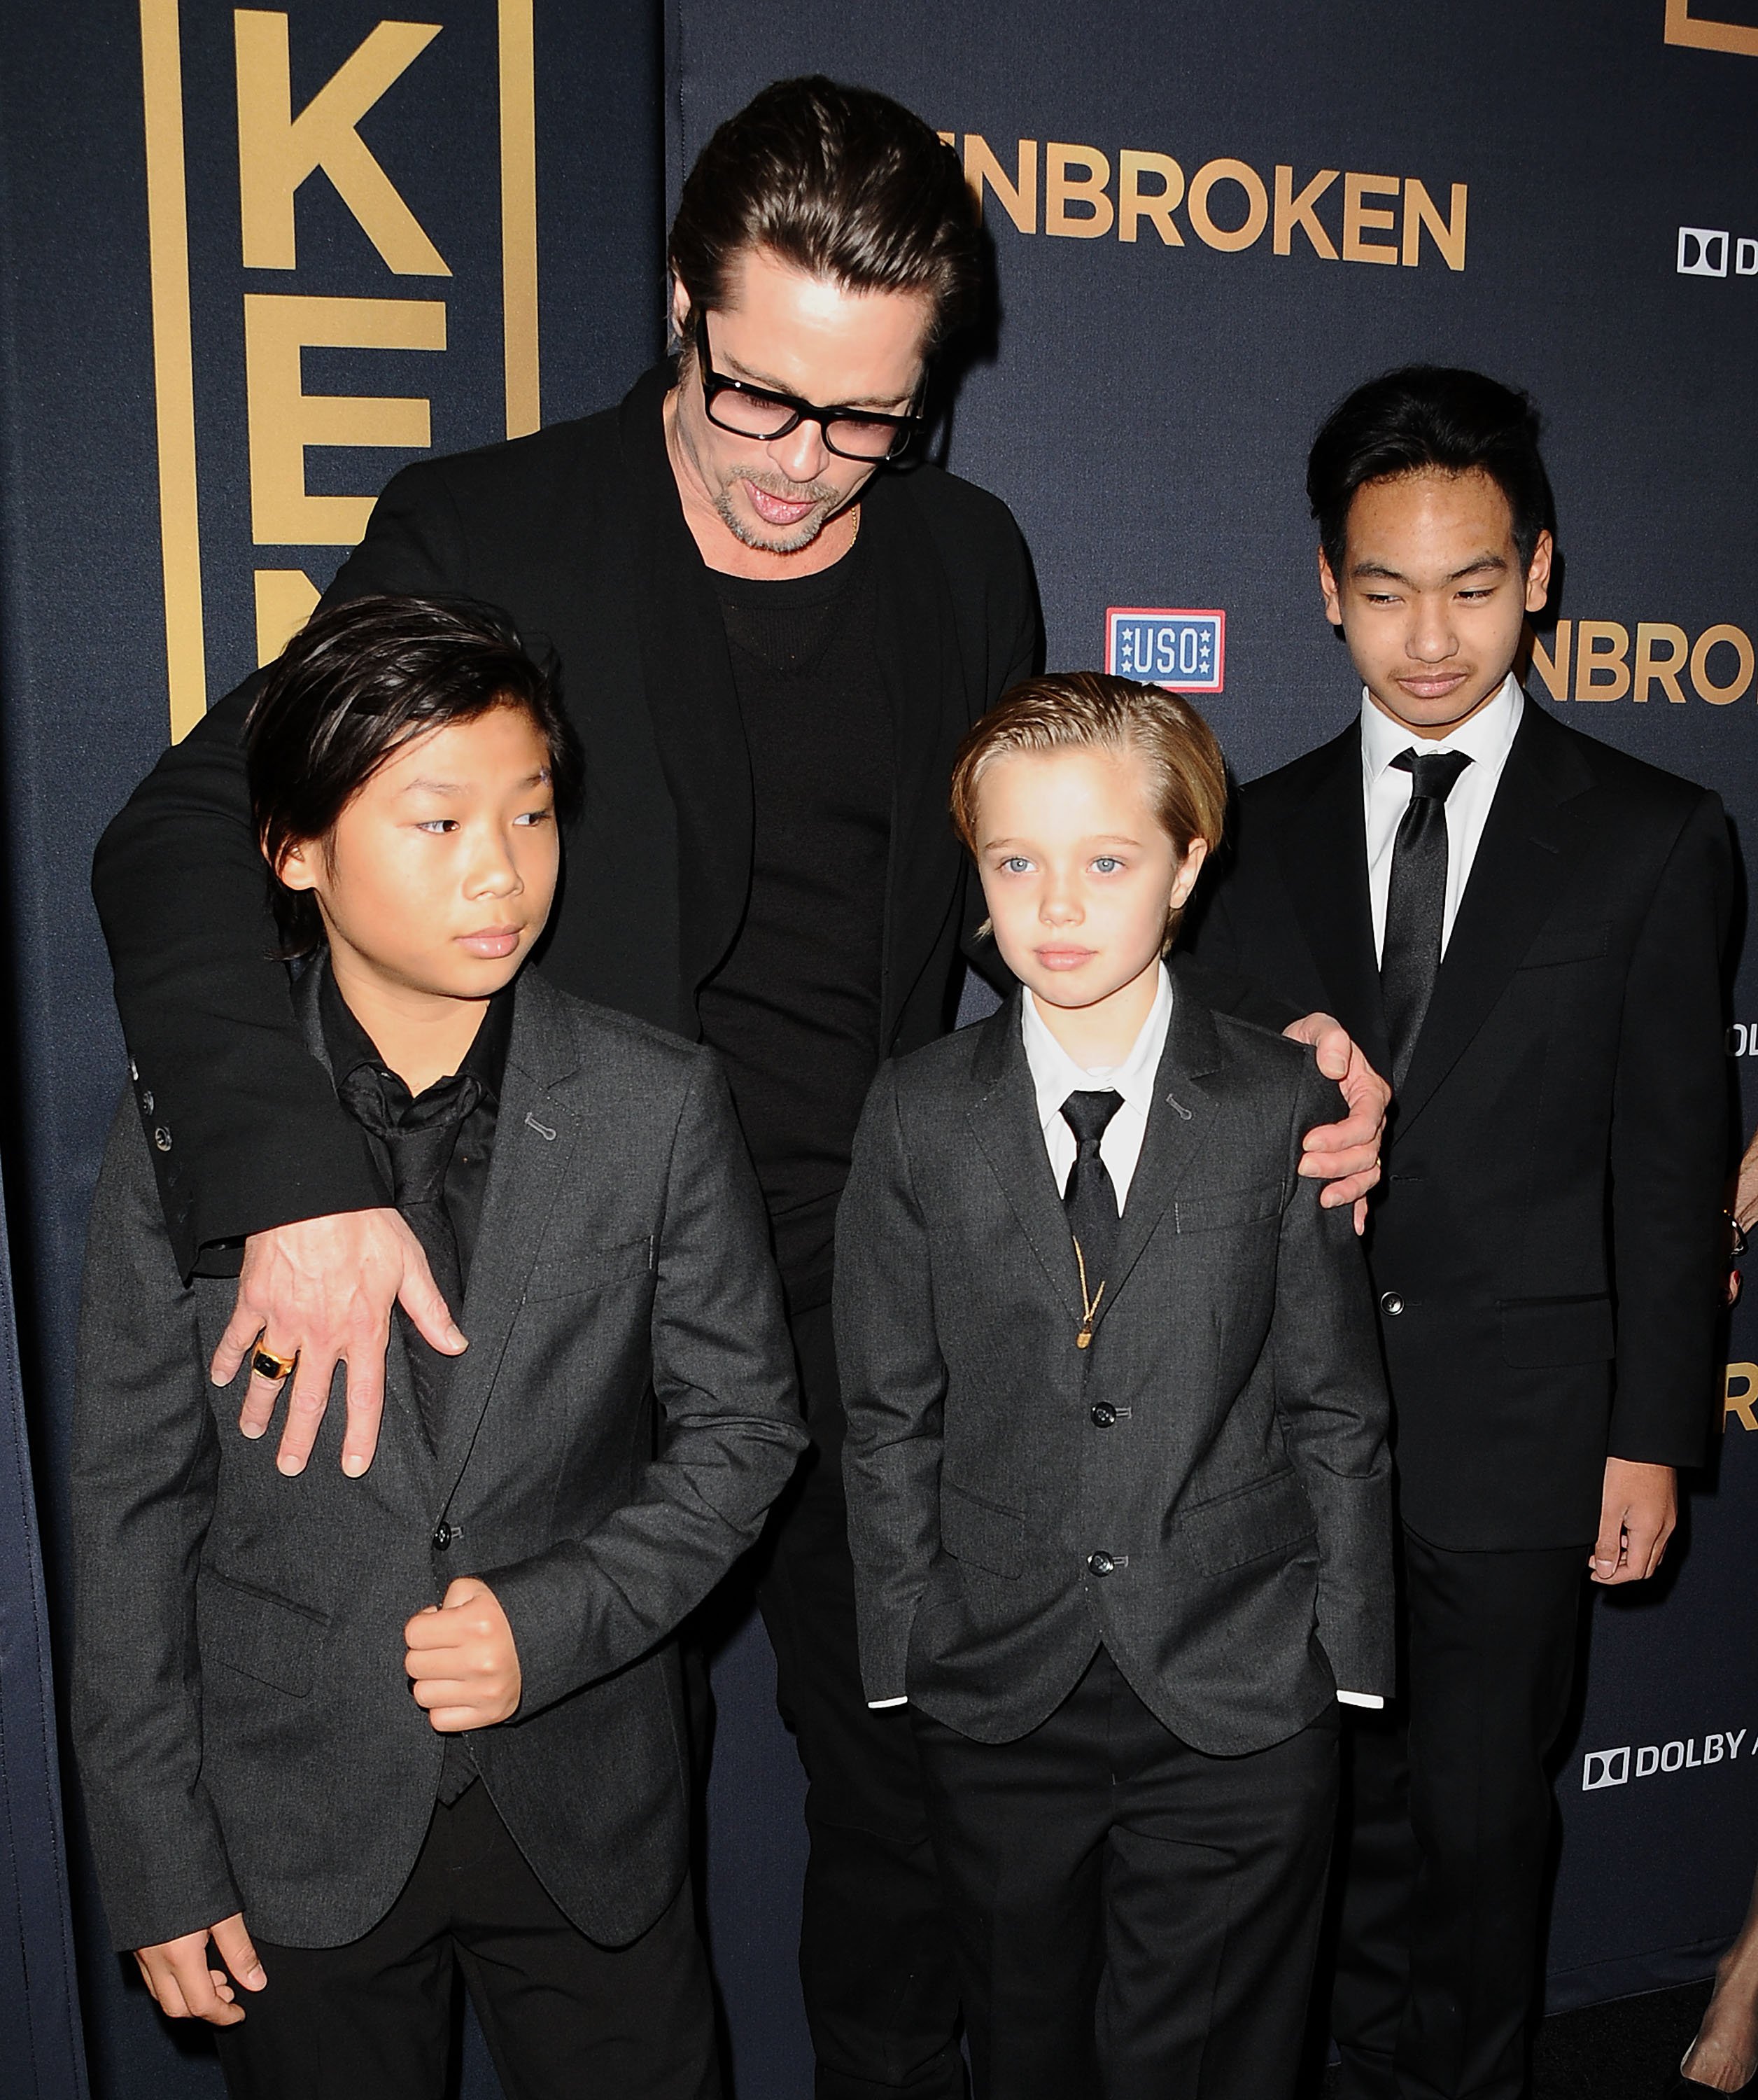 Brad Pitt, Pax Thien Jolie-Pitt, Shiloh Nouvel Jolie-Pitt, and Maddox Jolie-Pitt at TCL Chinese Theatre on December 15, 2014 in Hollywood, California | Source: Getty Images